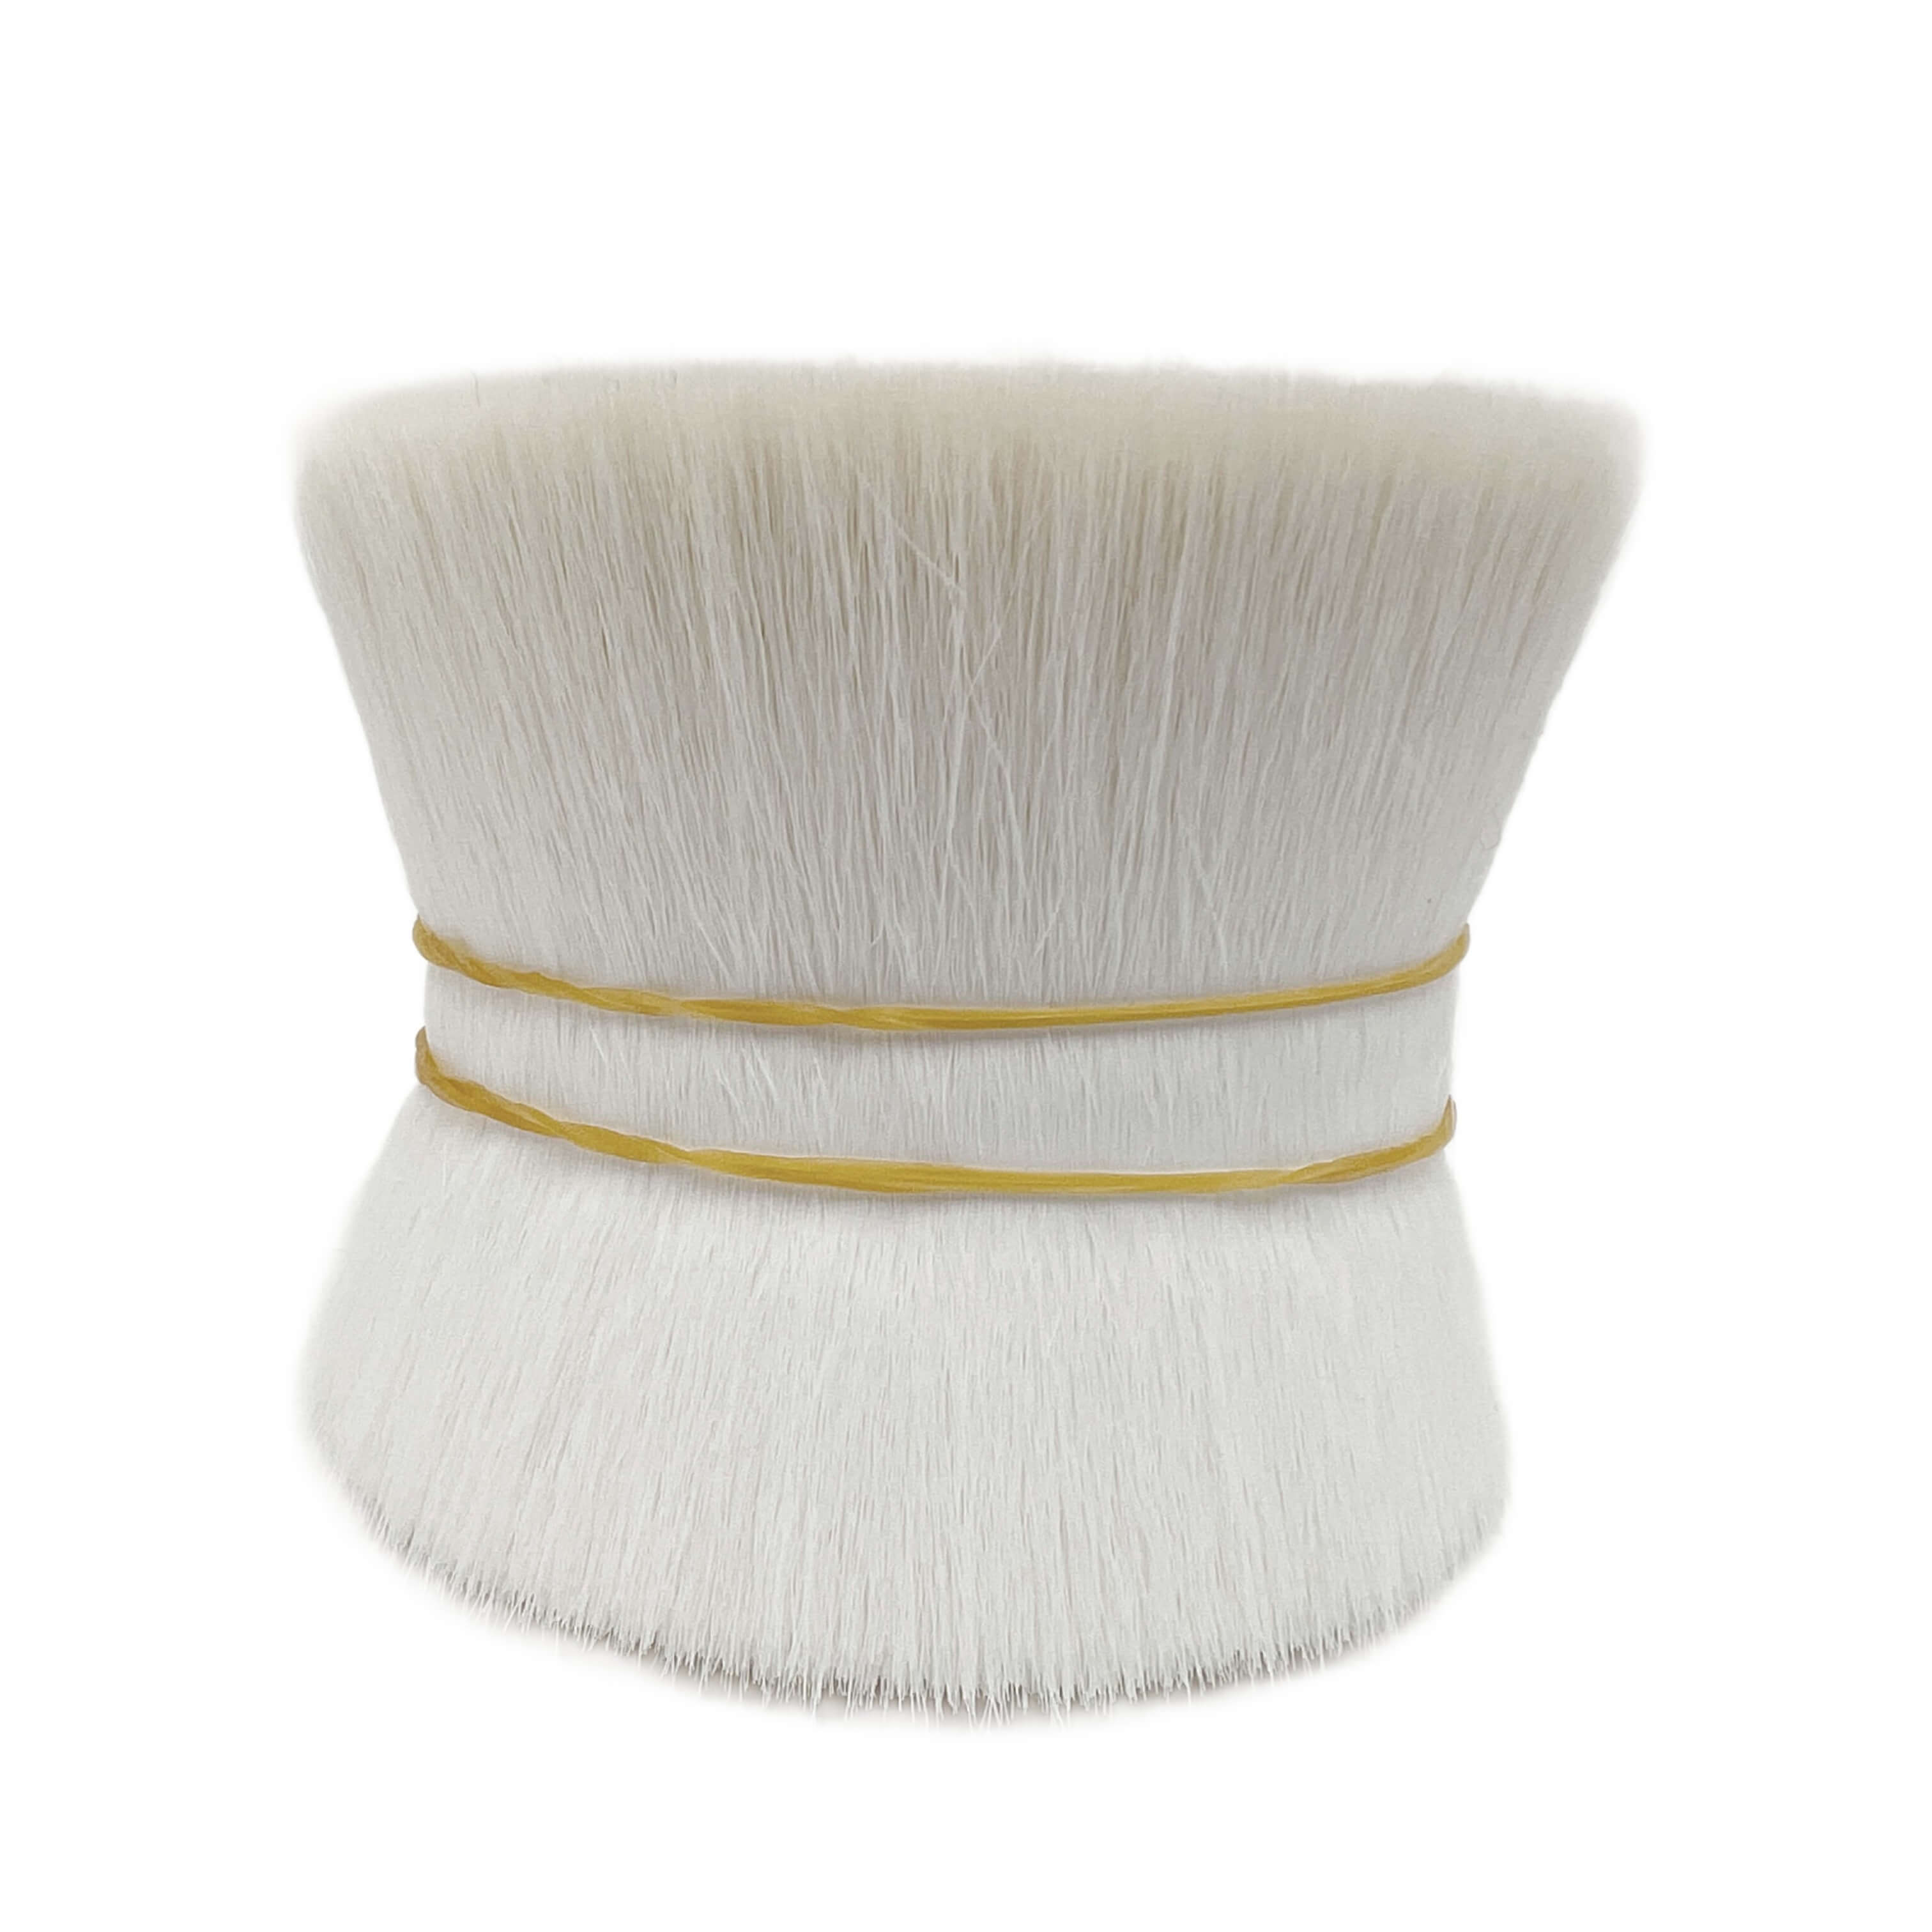 How to clean synthetic filament brushes?